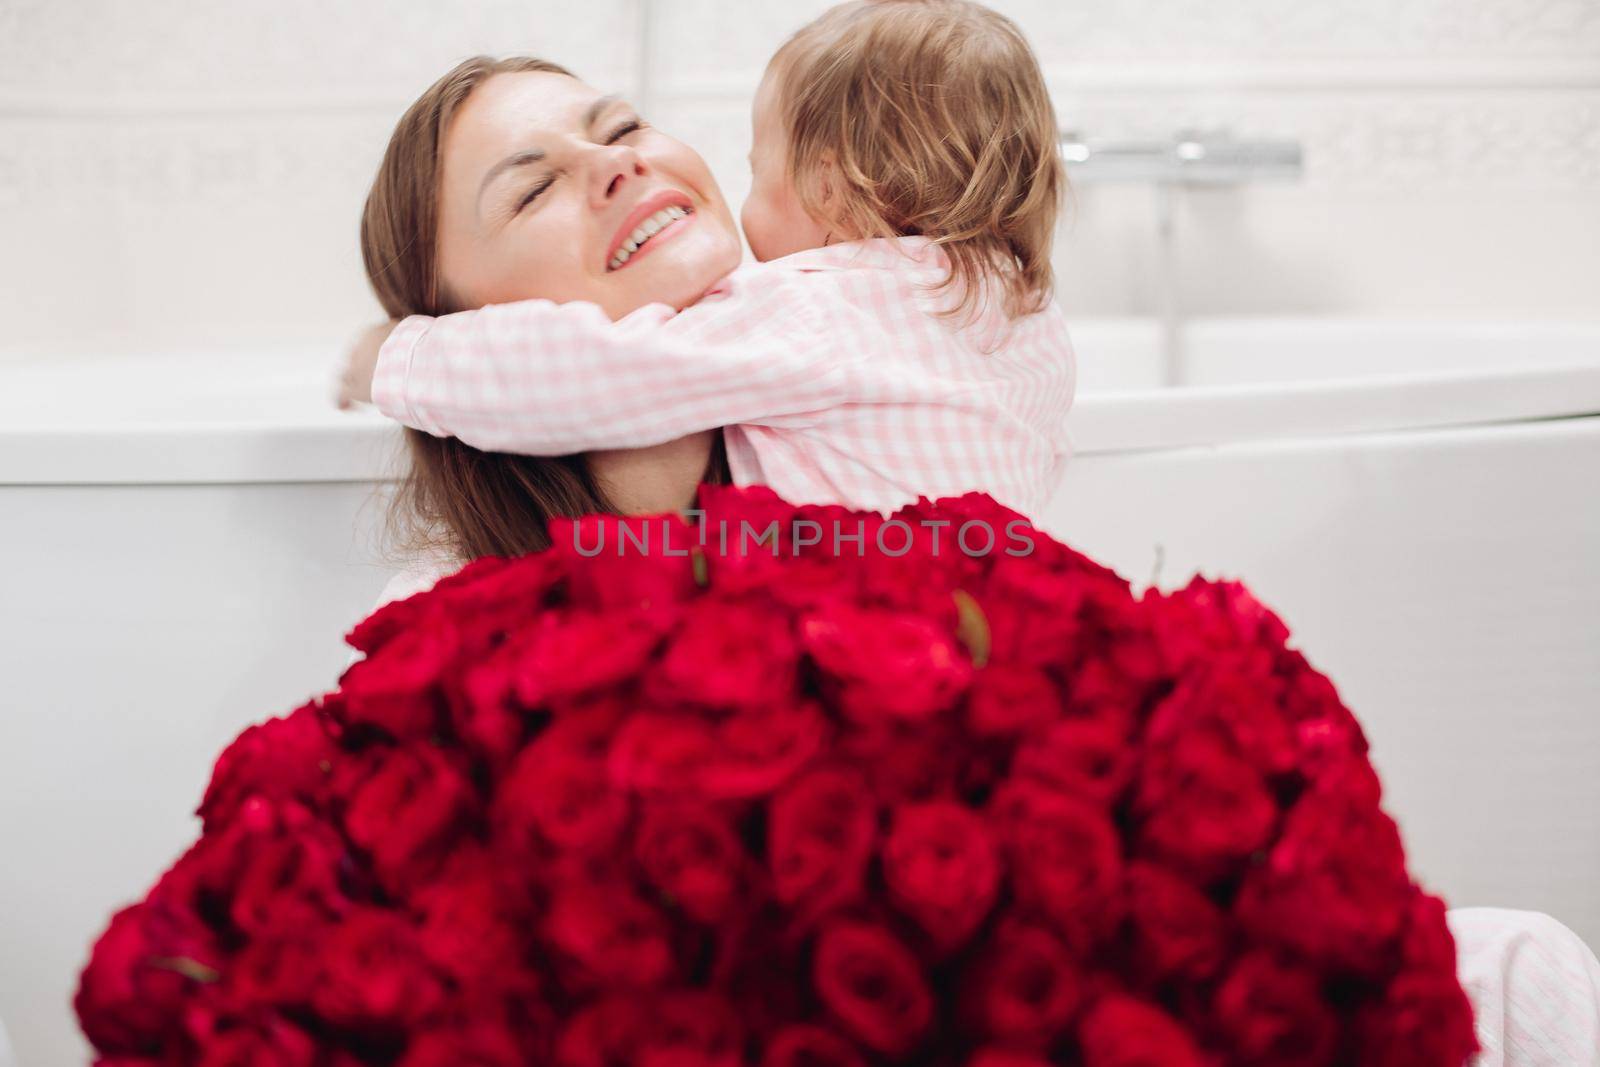 Beautiful young mother posing with little girl and big bouquet of red roses. Pretty woman kissing cute child and smiling. Happy family enjoying present. Concept of love and happiness.